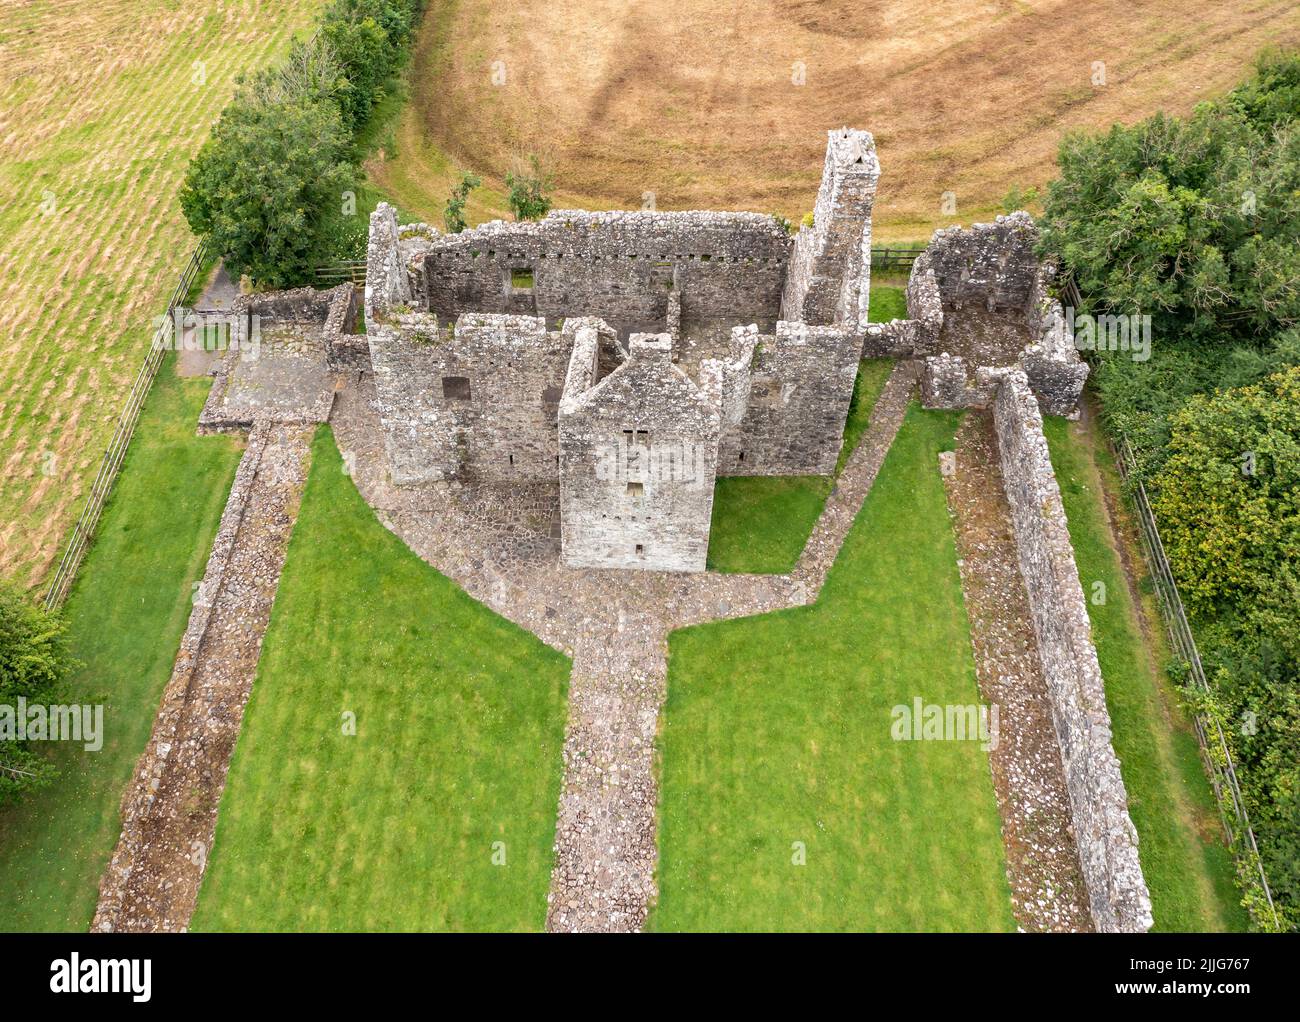 The beautiful Tully Castle by Enniskillen, County Fermanagh inNorthern Ireland. Stock Photo